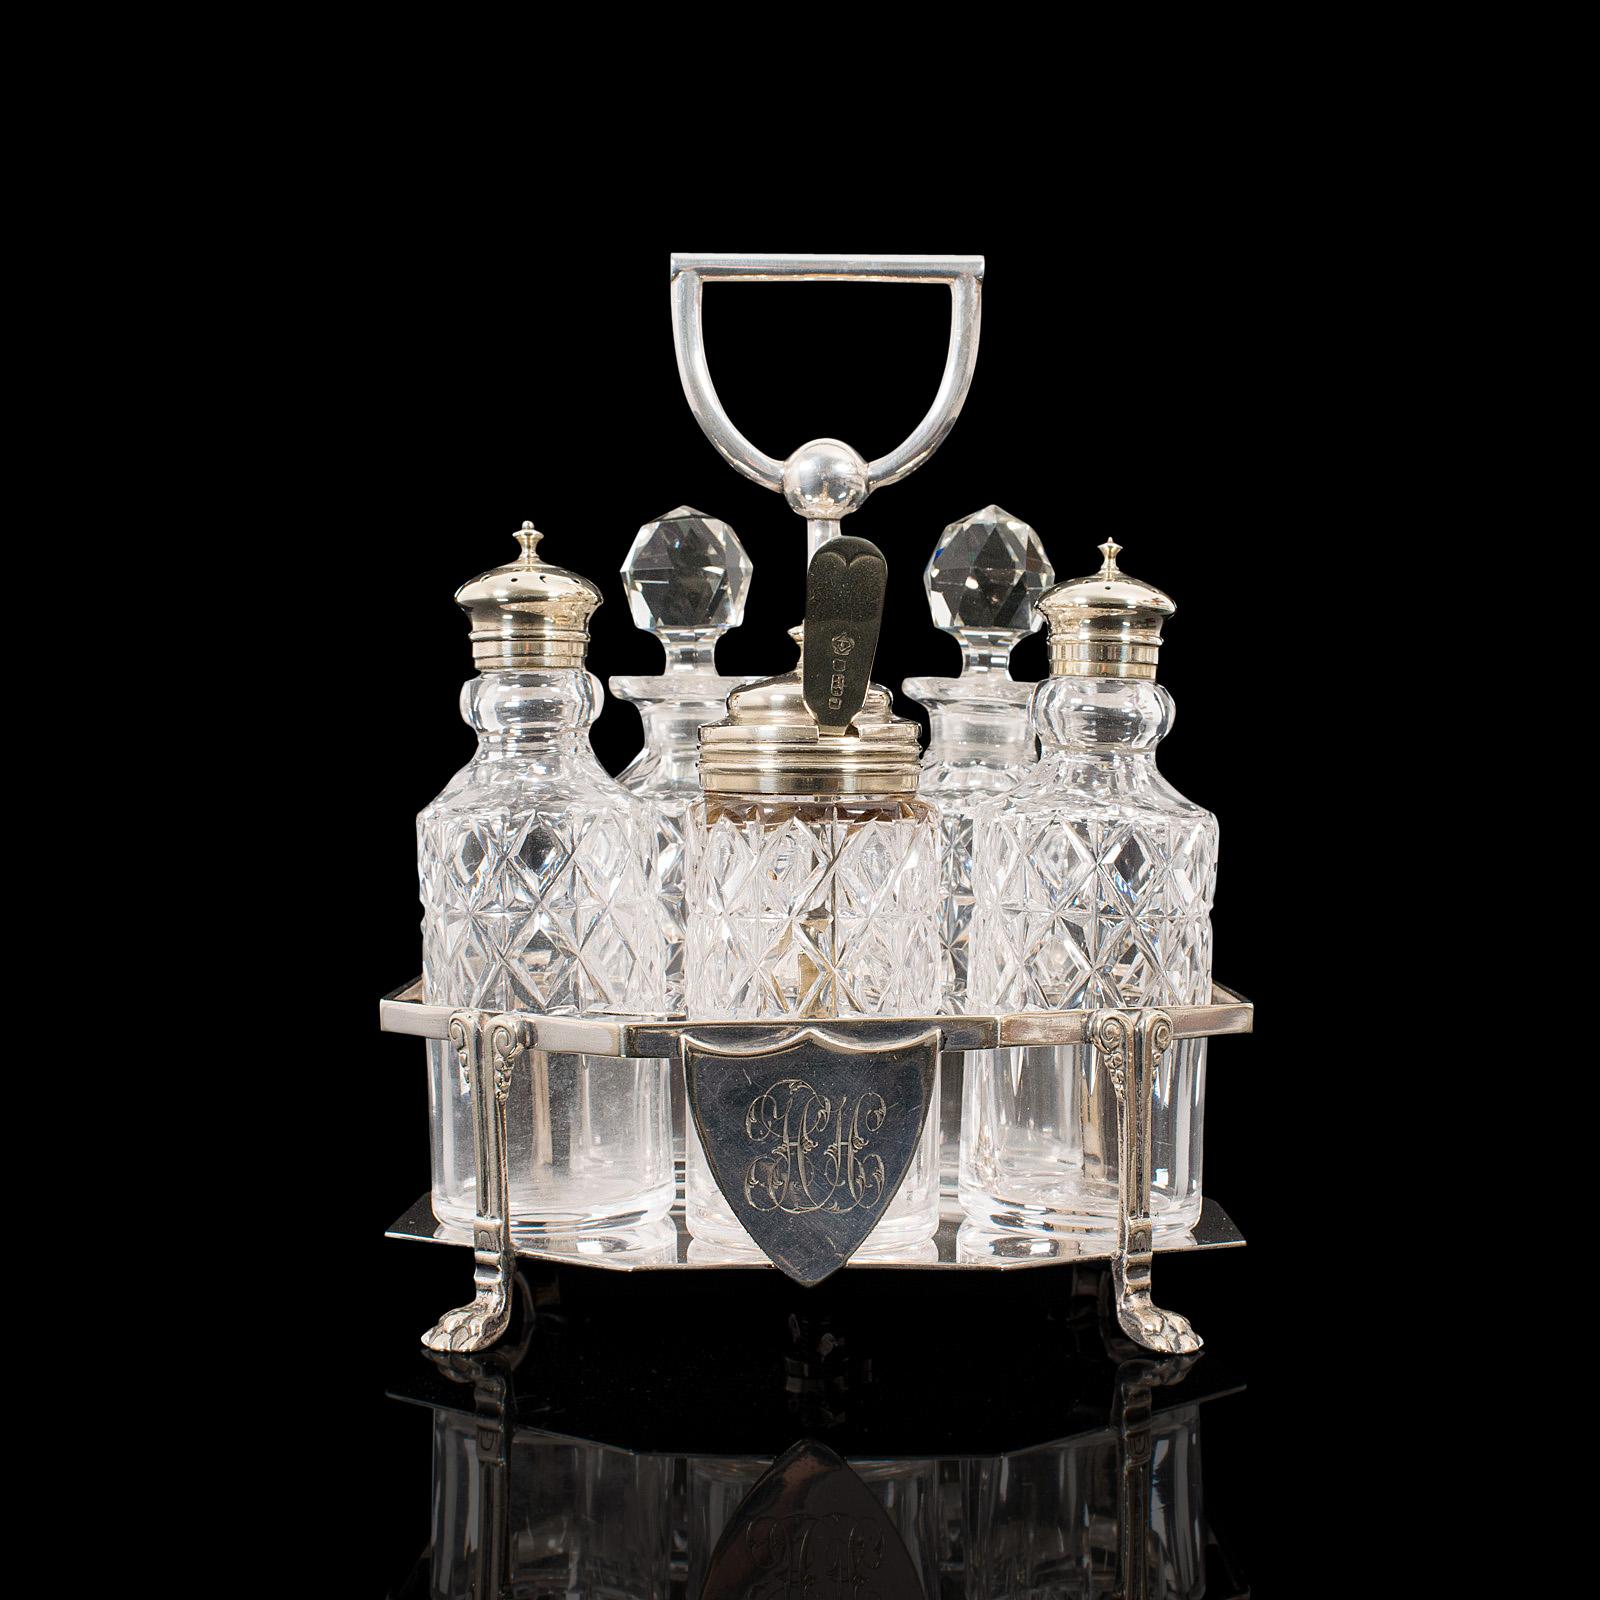 This is an antique condiment serving set. An English, silver plated table rack by Philip Ashbury and Sons of Sheffield, dating to the Edwardian period, circa 1910.

Attractive 5-piece condiments set for the dinner table
Displays a desirable aged